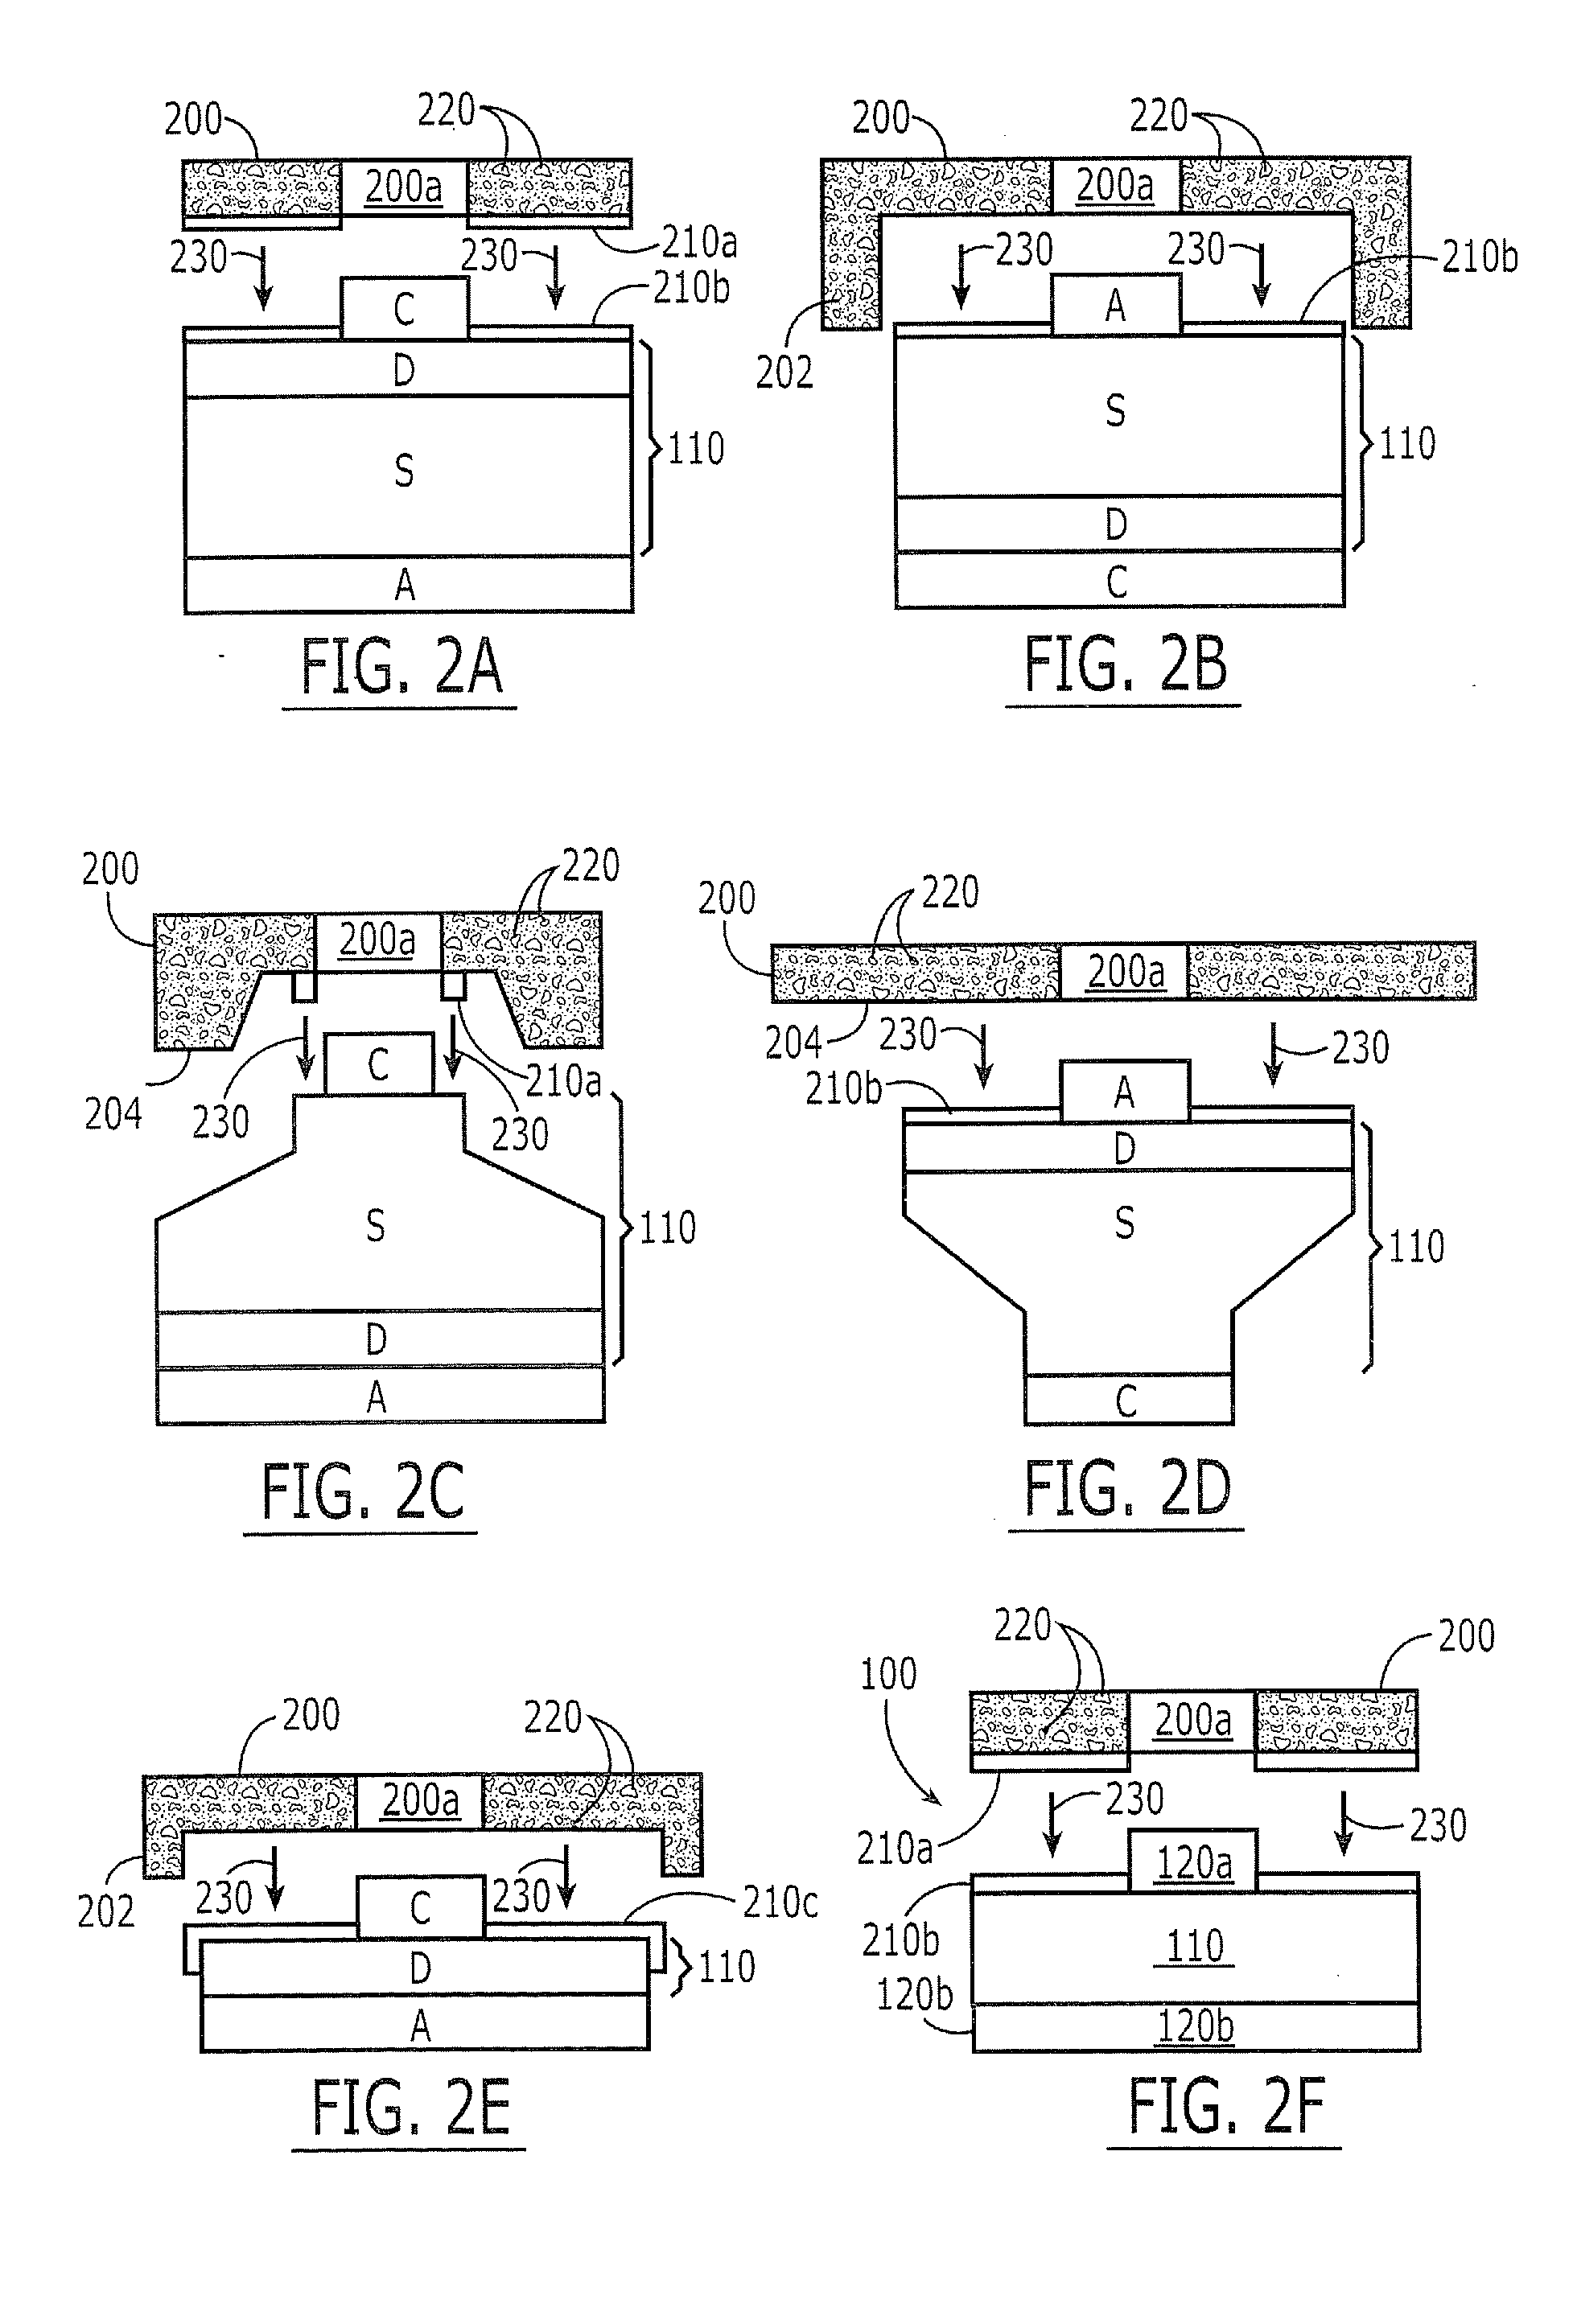 Optical preforms for solid state light emitting dice, and methods and systems for fabricating and assembling same